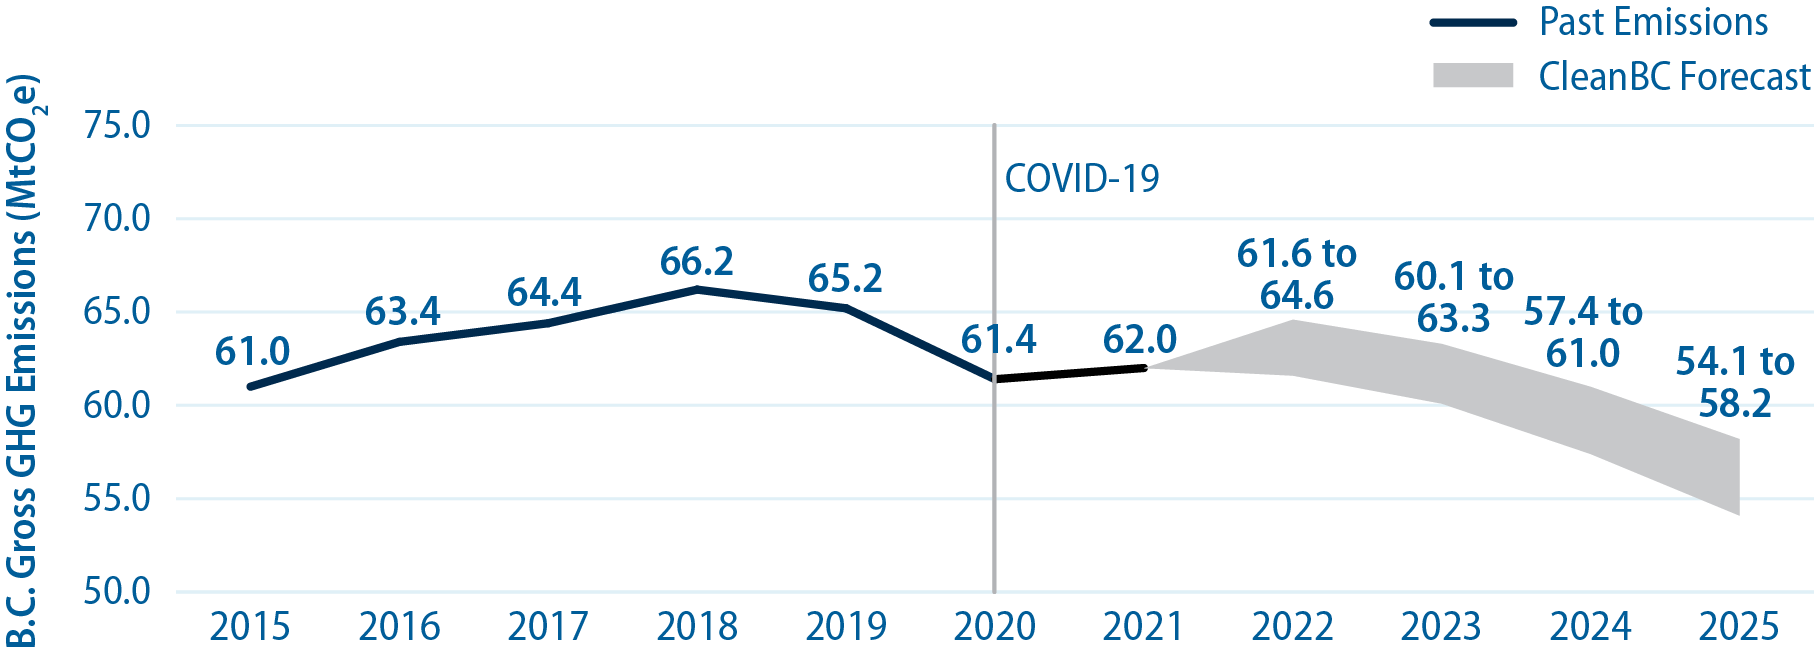 GHG emissions forecast 2022 to 2025